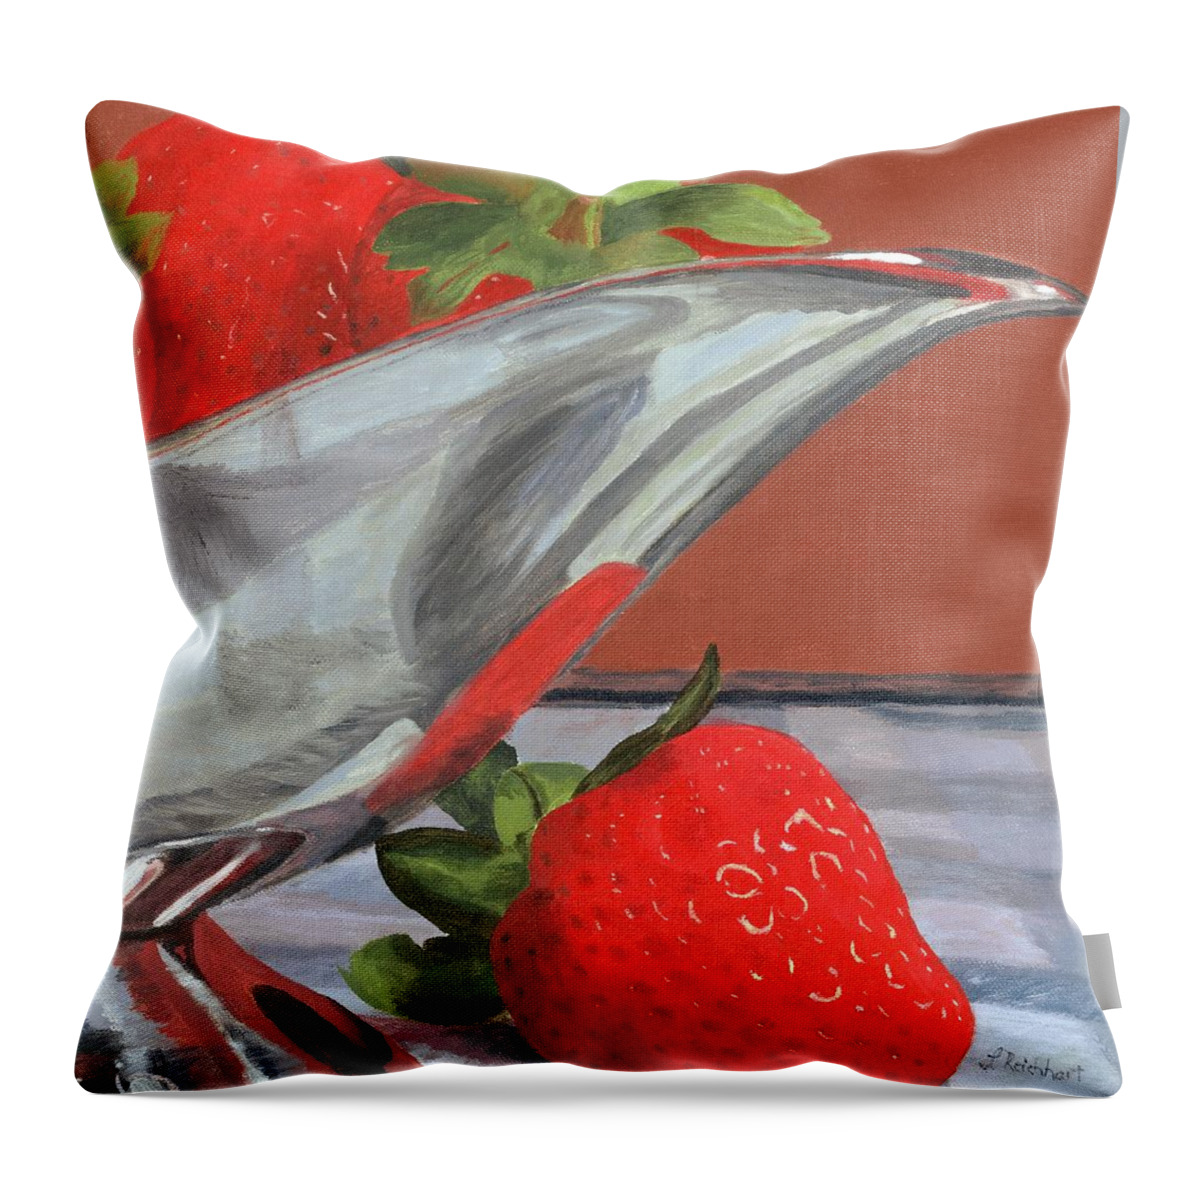 Strawberries Throw Pillow featuring the painting Strawberry Season by Lynne Reichhart